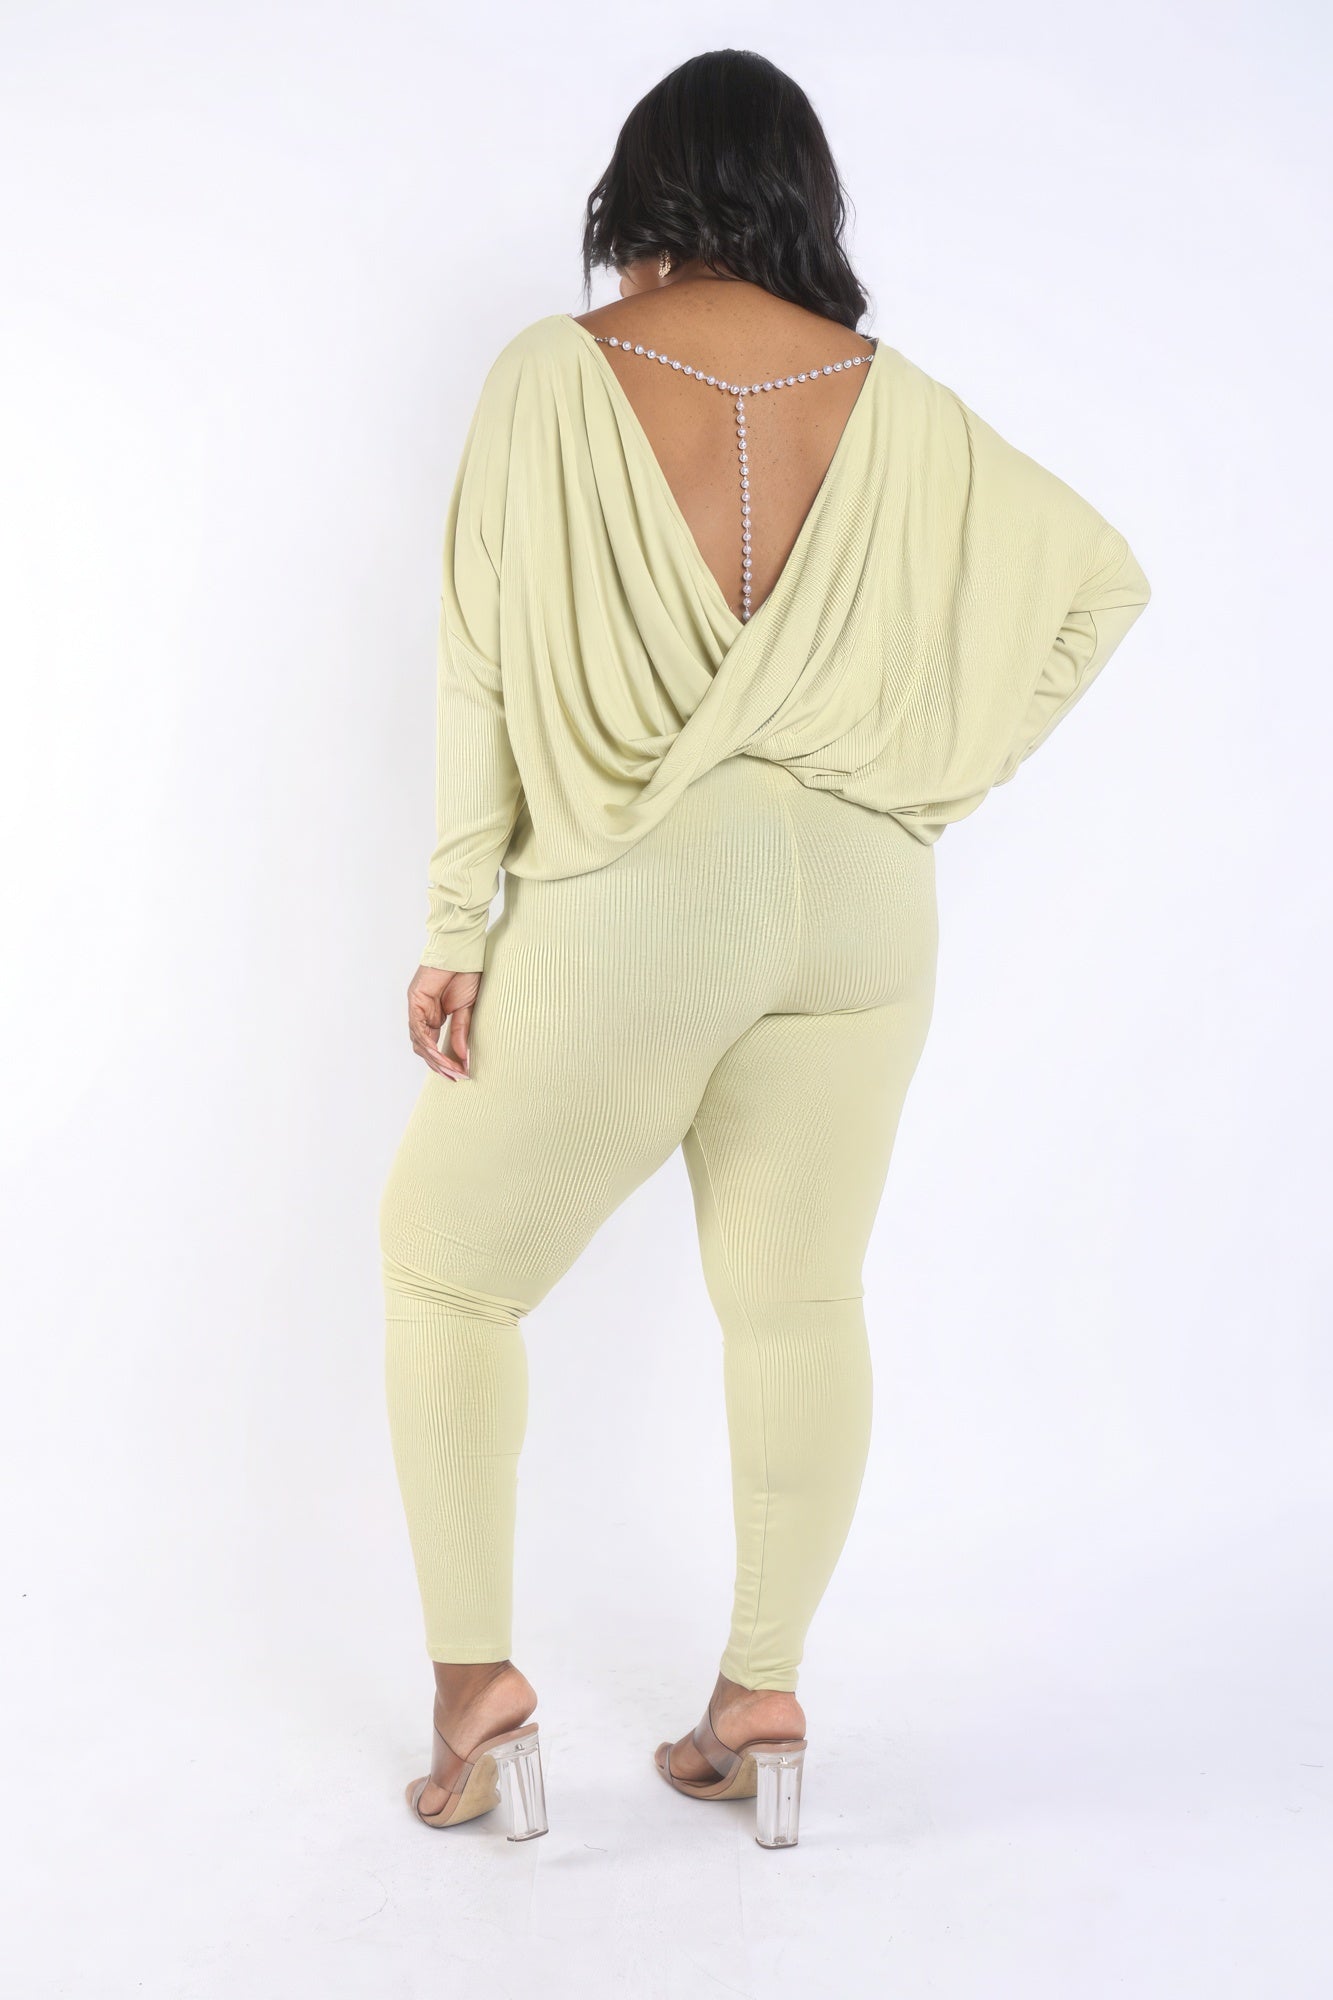 Back Strap Point Set in Lime: Open Back Strappy Outfit Set